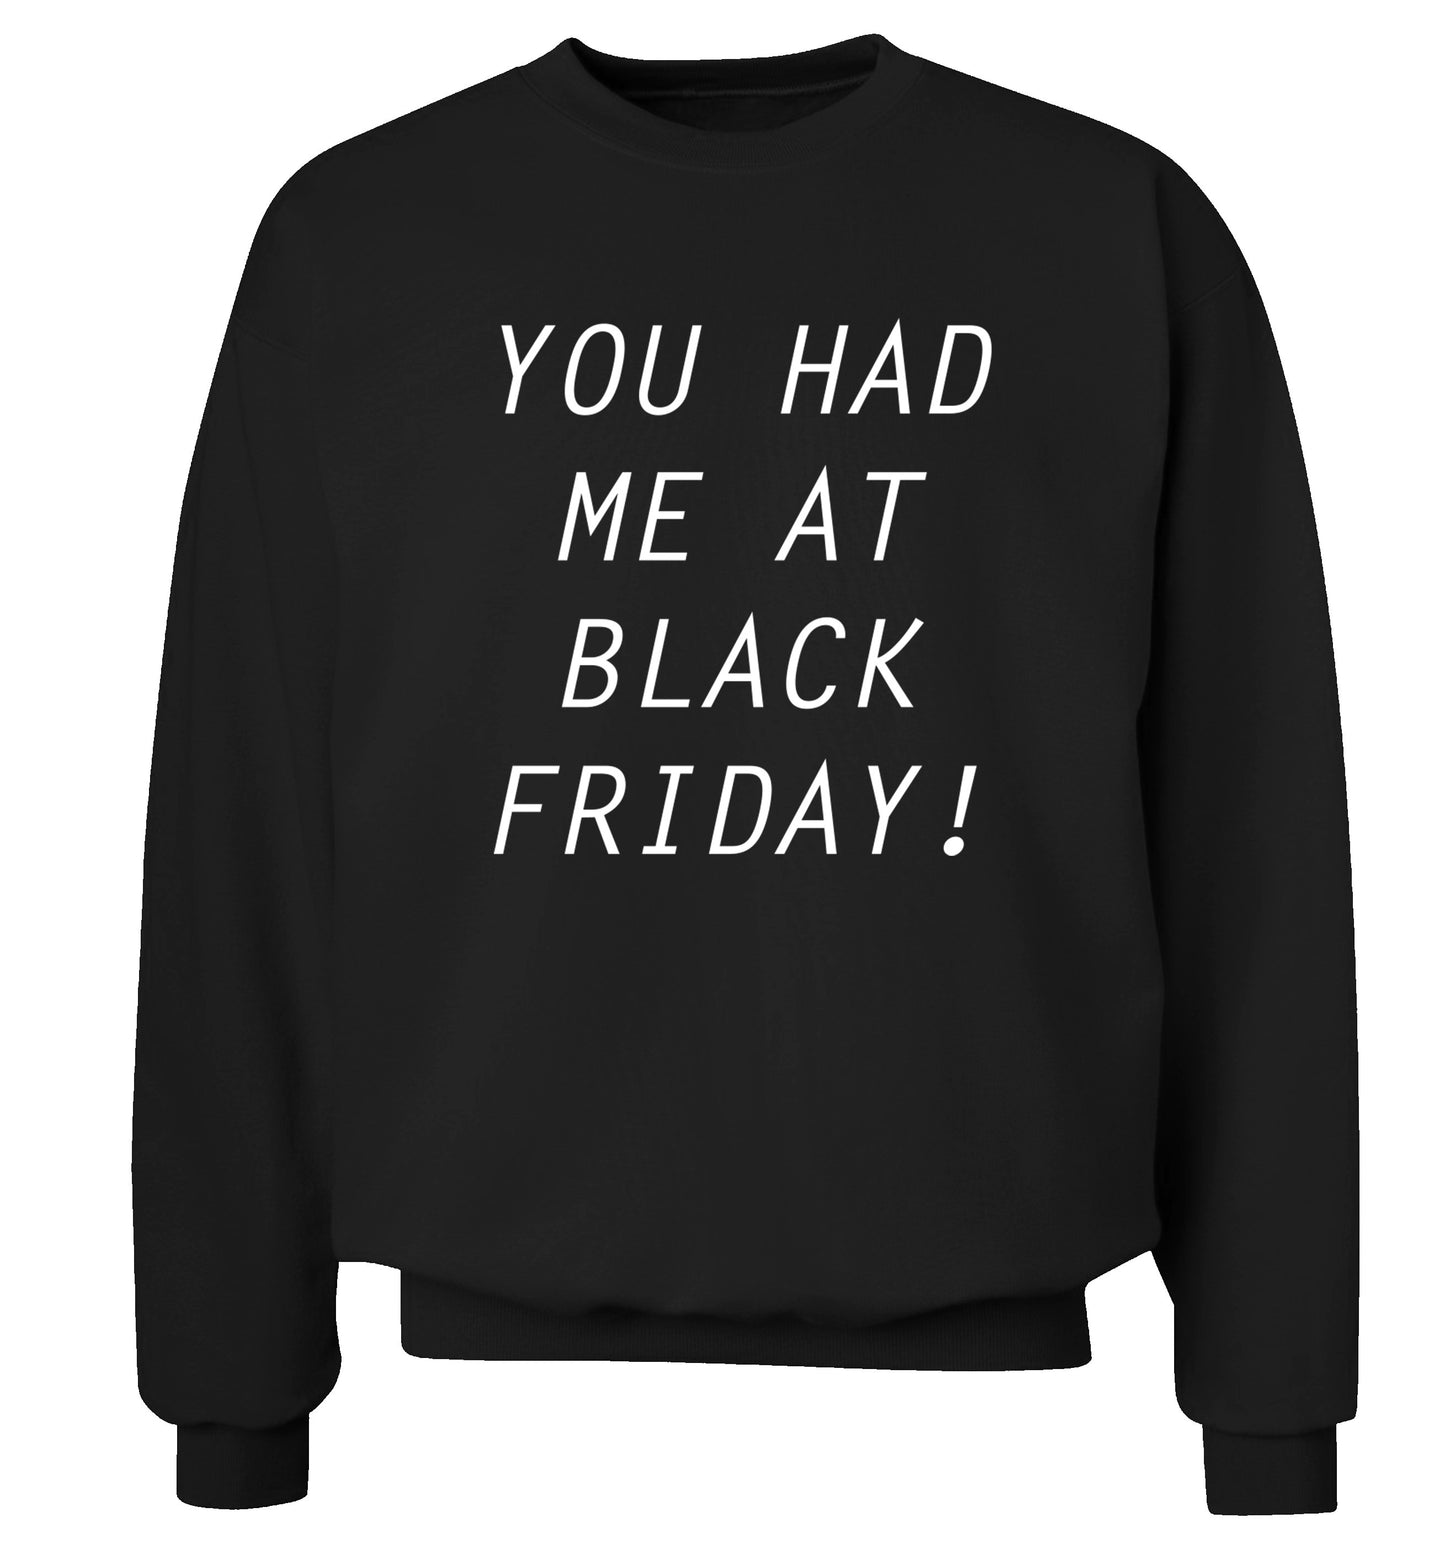 You had me at black friday Adult's unisex black Sweater 2XL